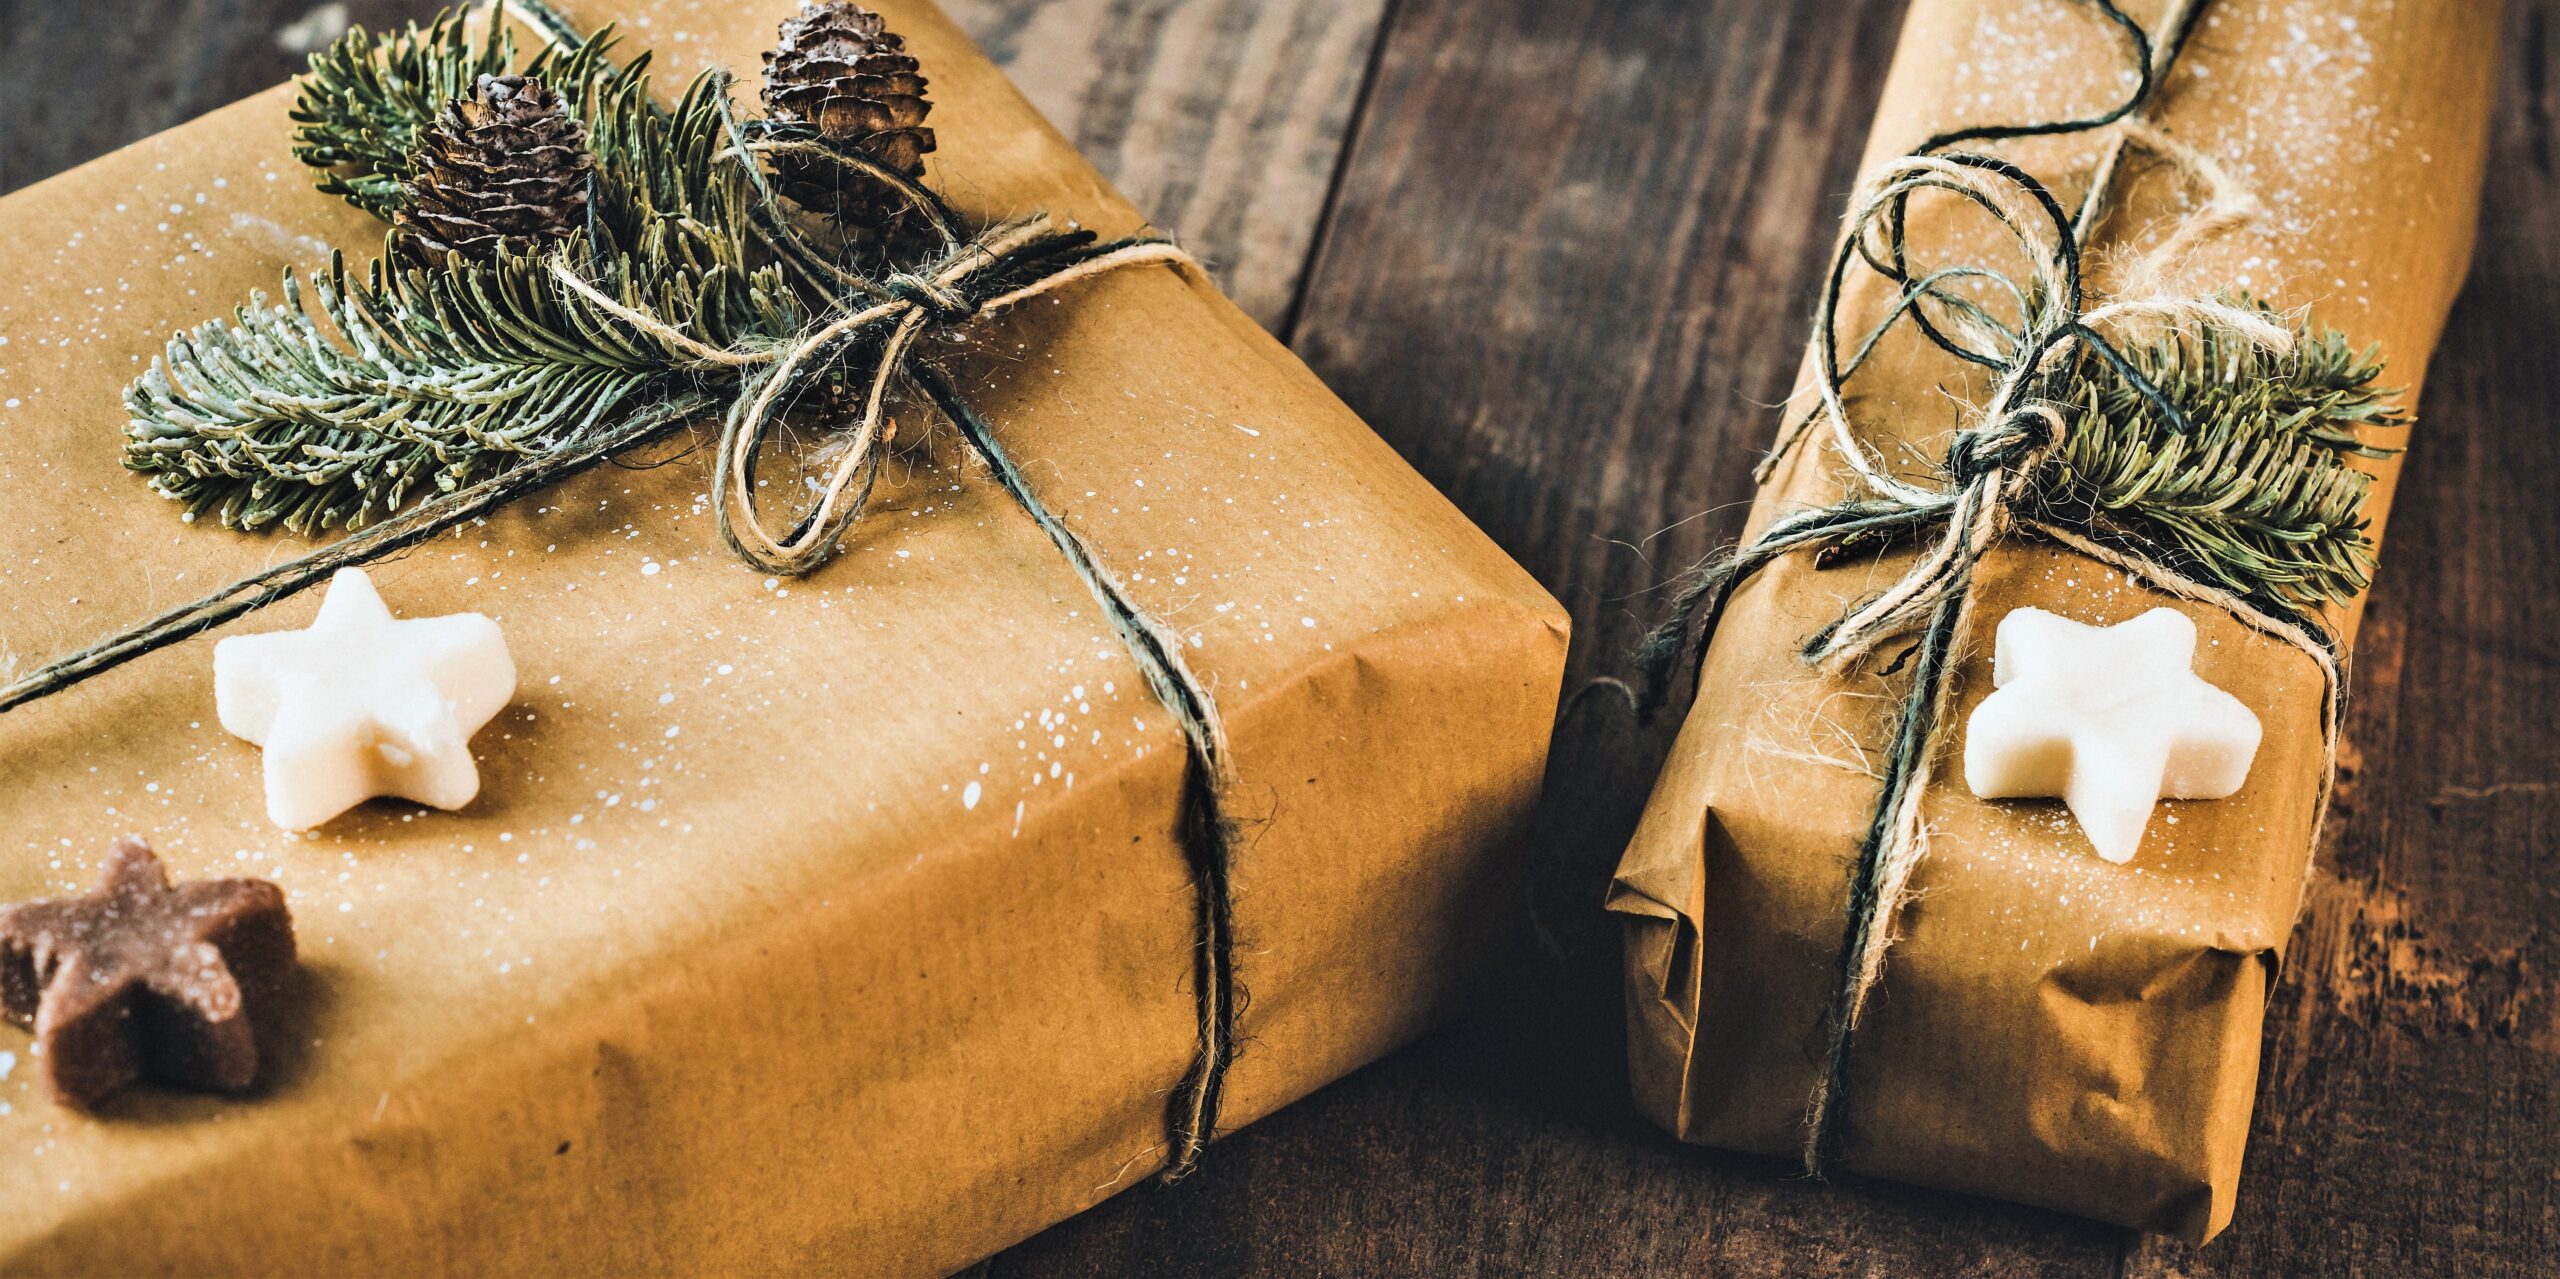 A couple of presents are wrapped in brown paper and adorned with twine and a few pine branches.